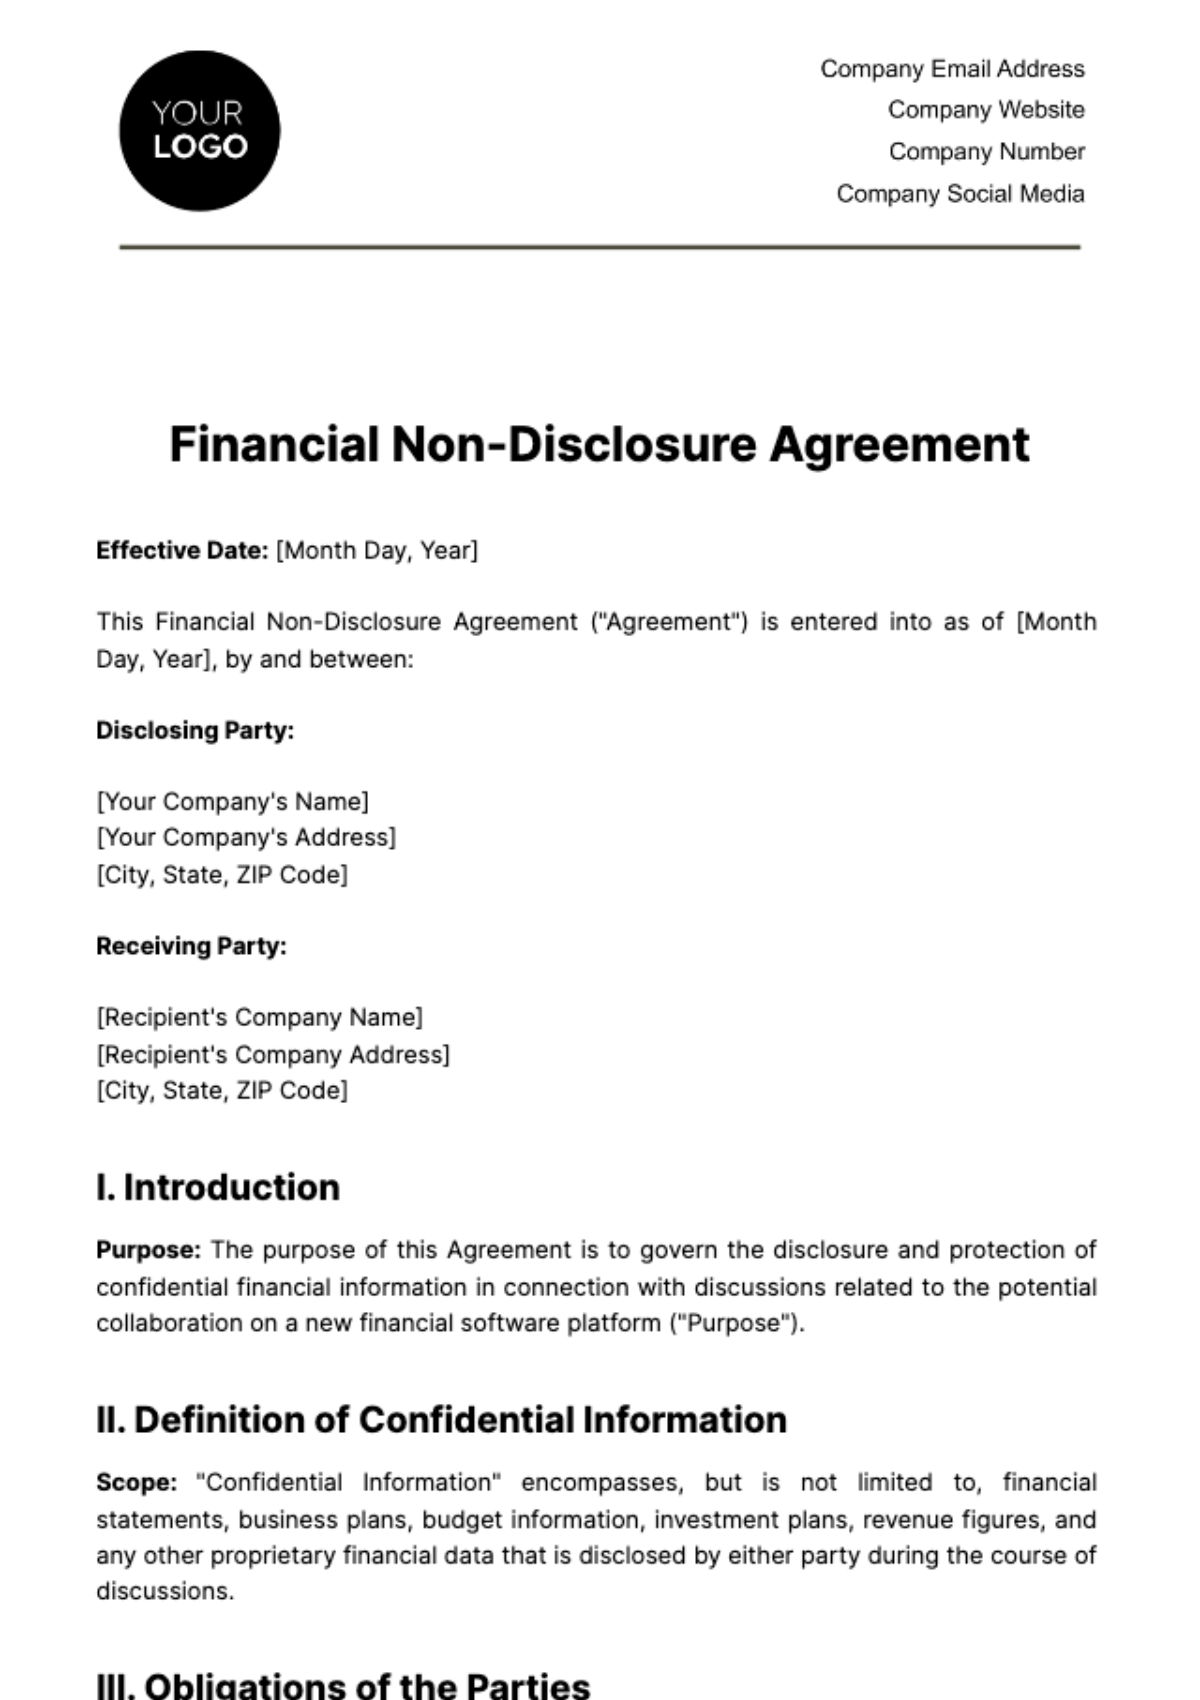 Free Financial Non-Disclosure Agreement Template